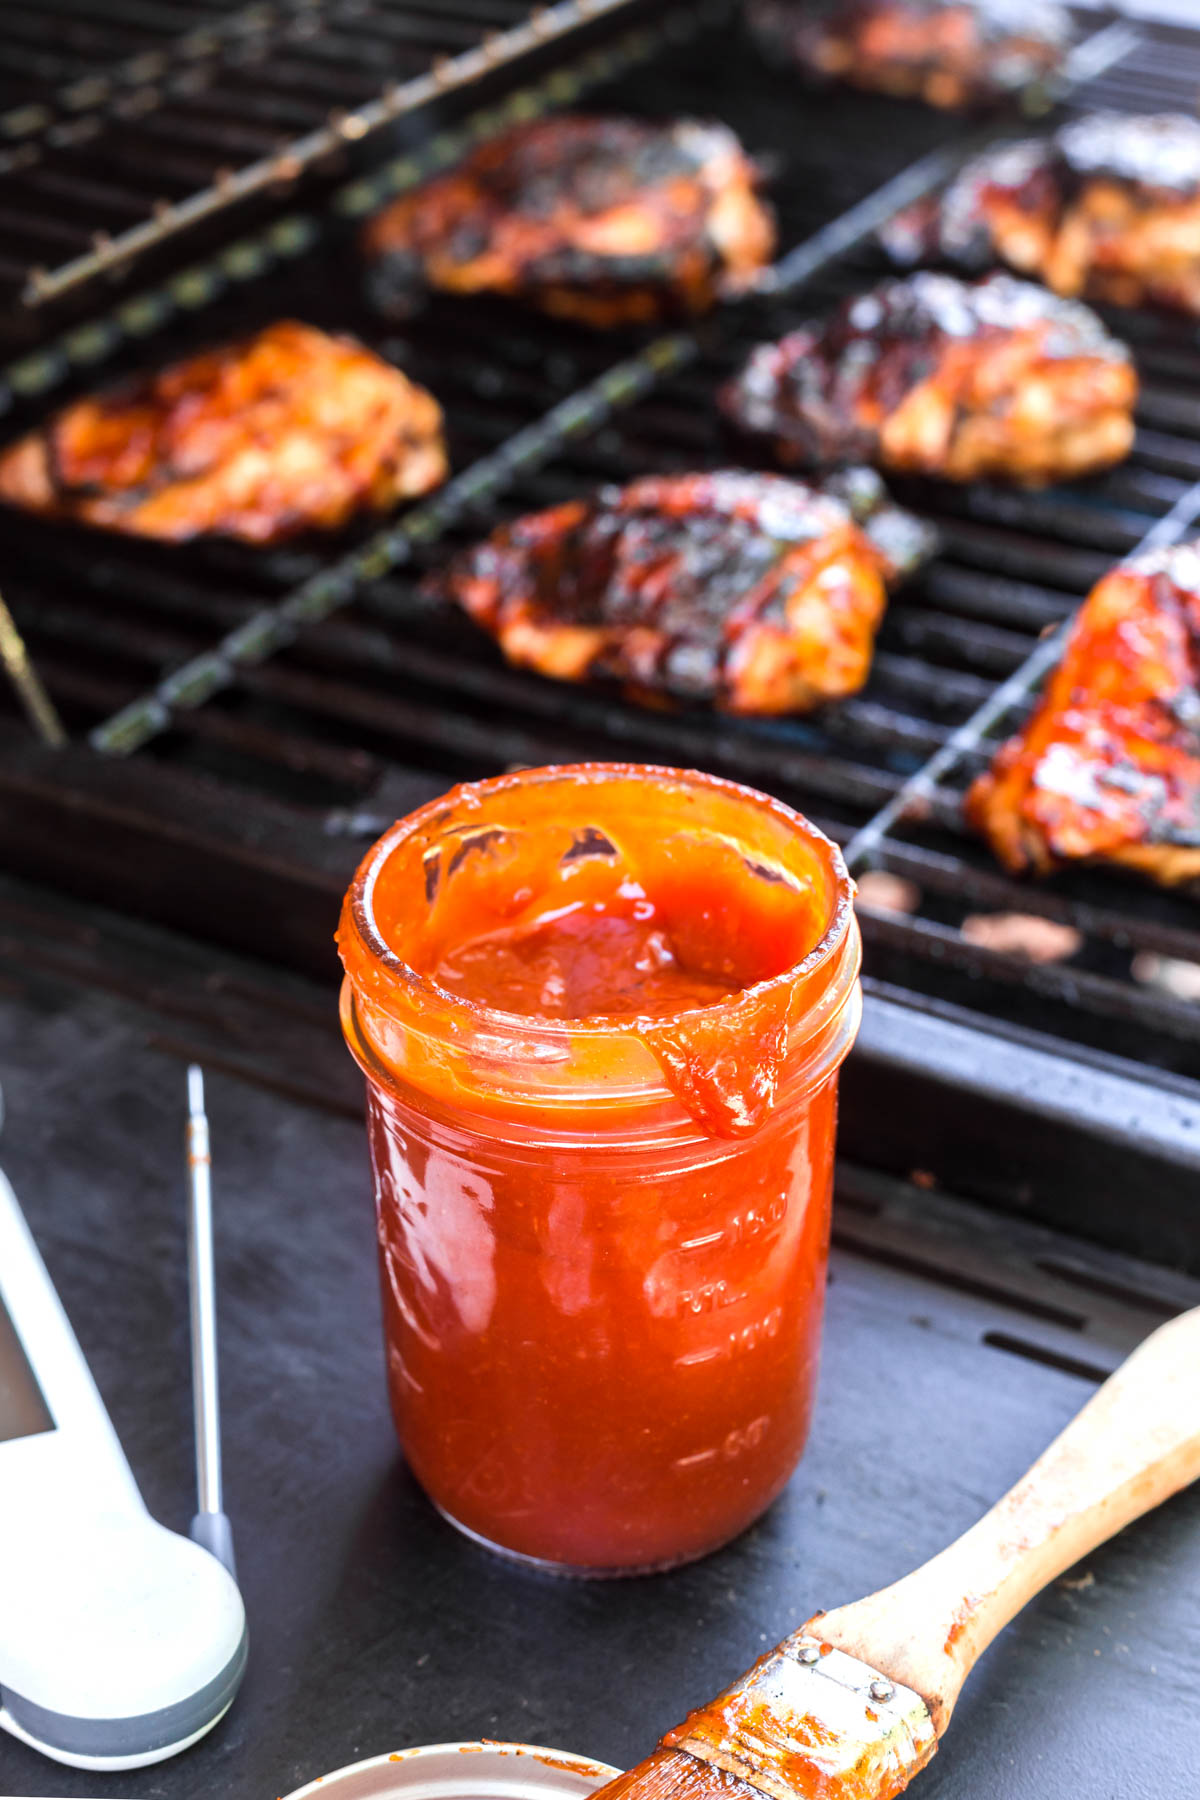 Peach bourbon BBQ sauce ins glass jar beside the grill that is cooking chicken thighs.